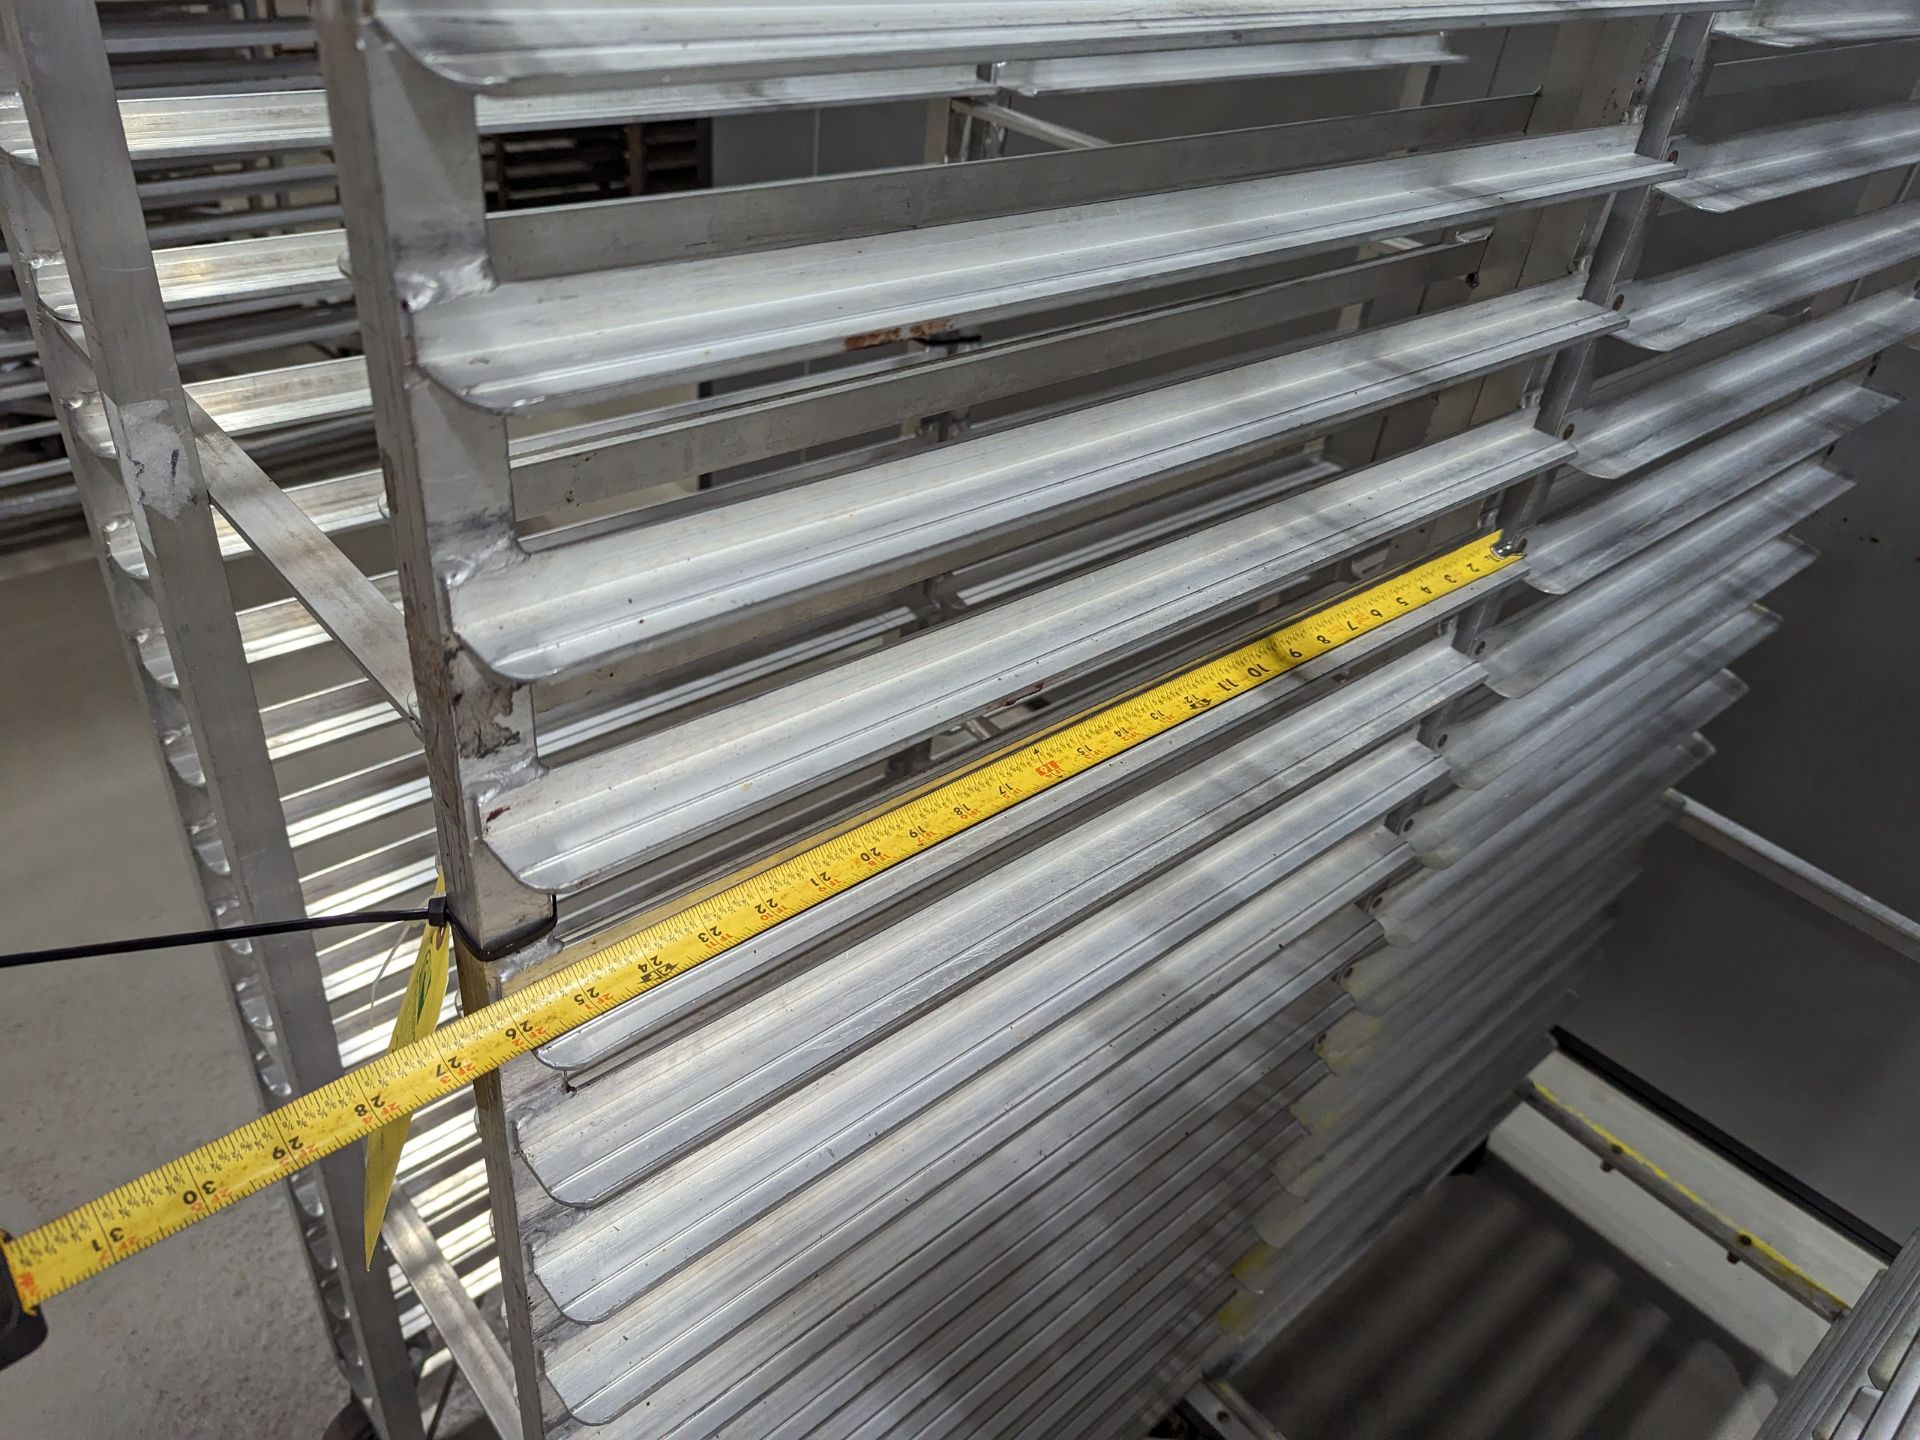 Lot of 4 Single Wide Aluminum Bakery Racks, Dimensions LxWxH: 53x41x69 Measurements are for lot of - Image 4 of 7